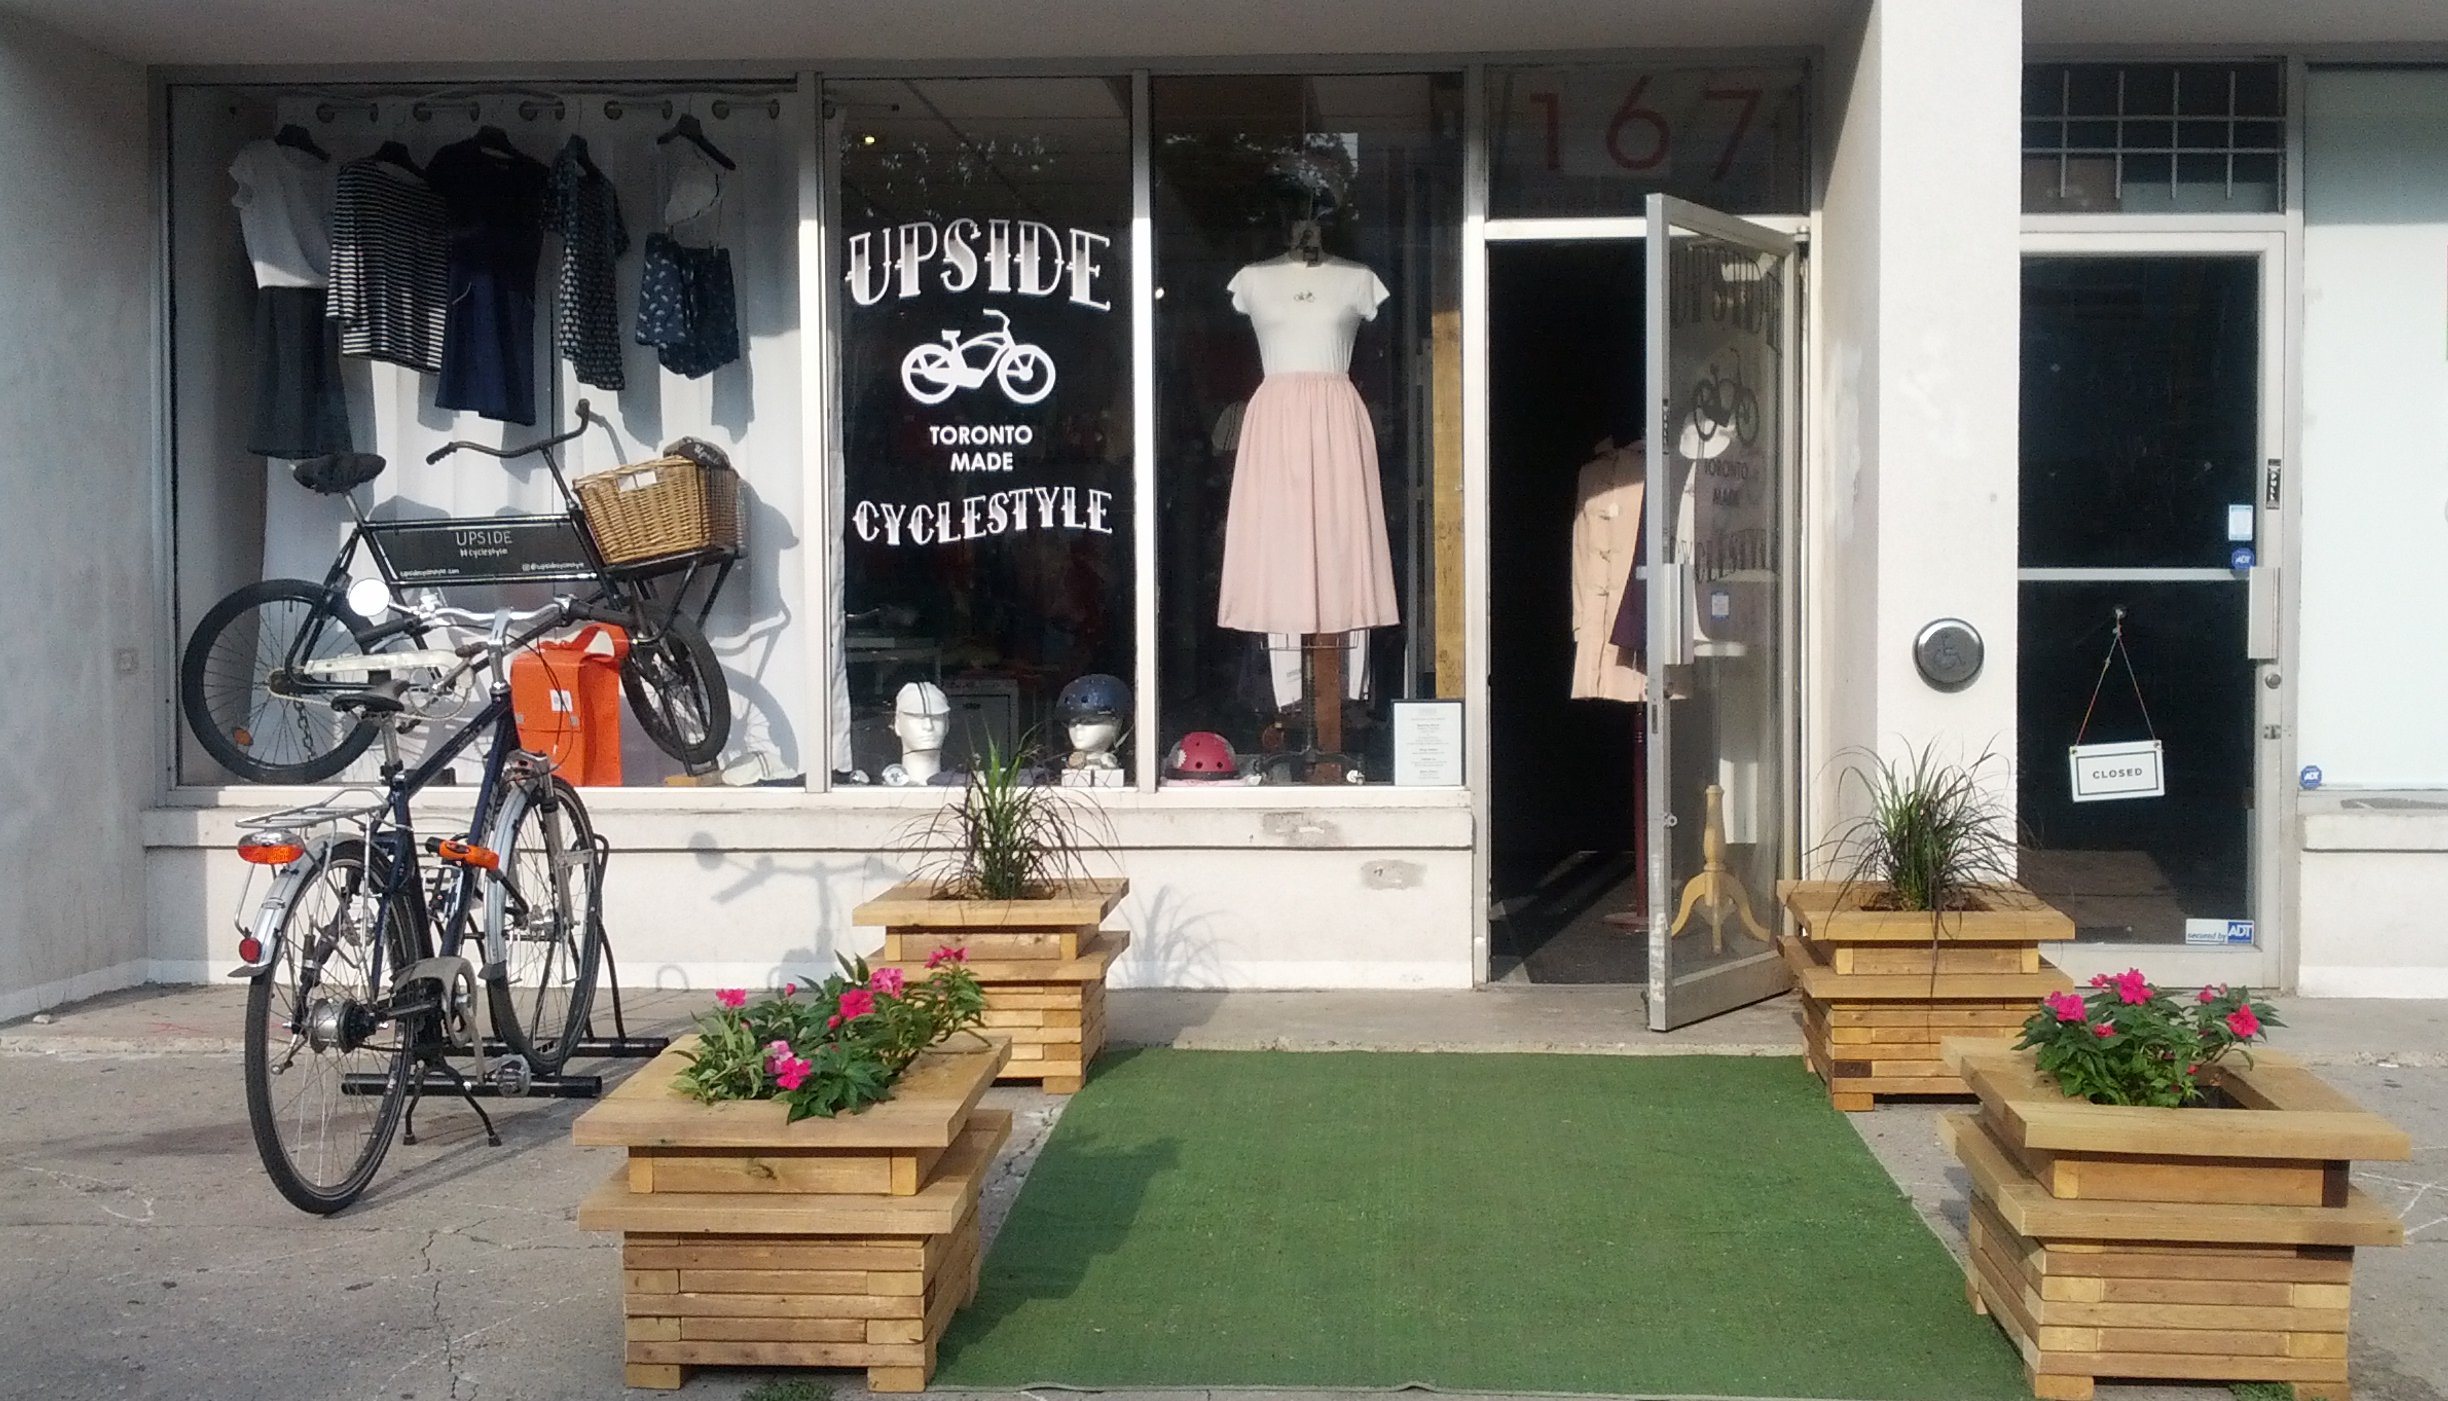 Shopping at Upside Cyclestyle